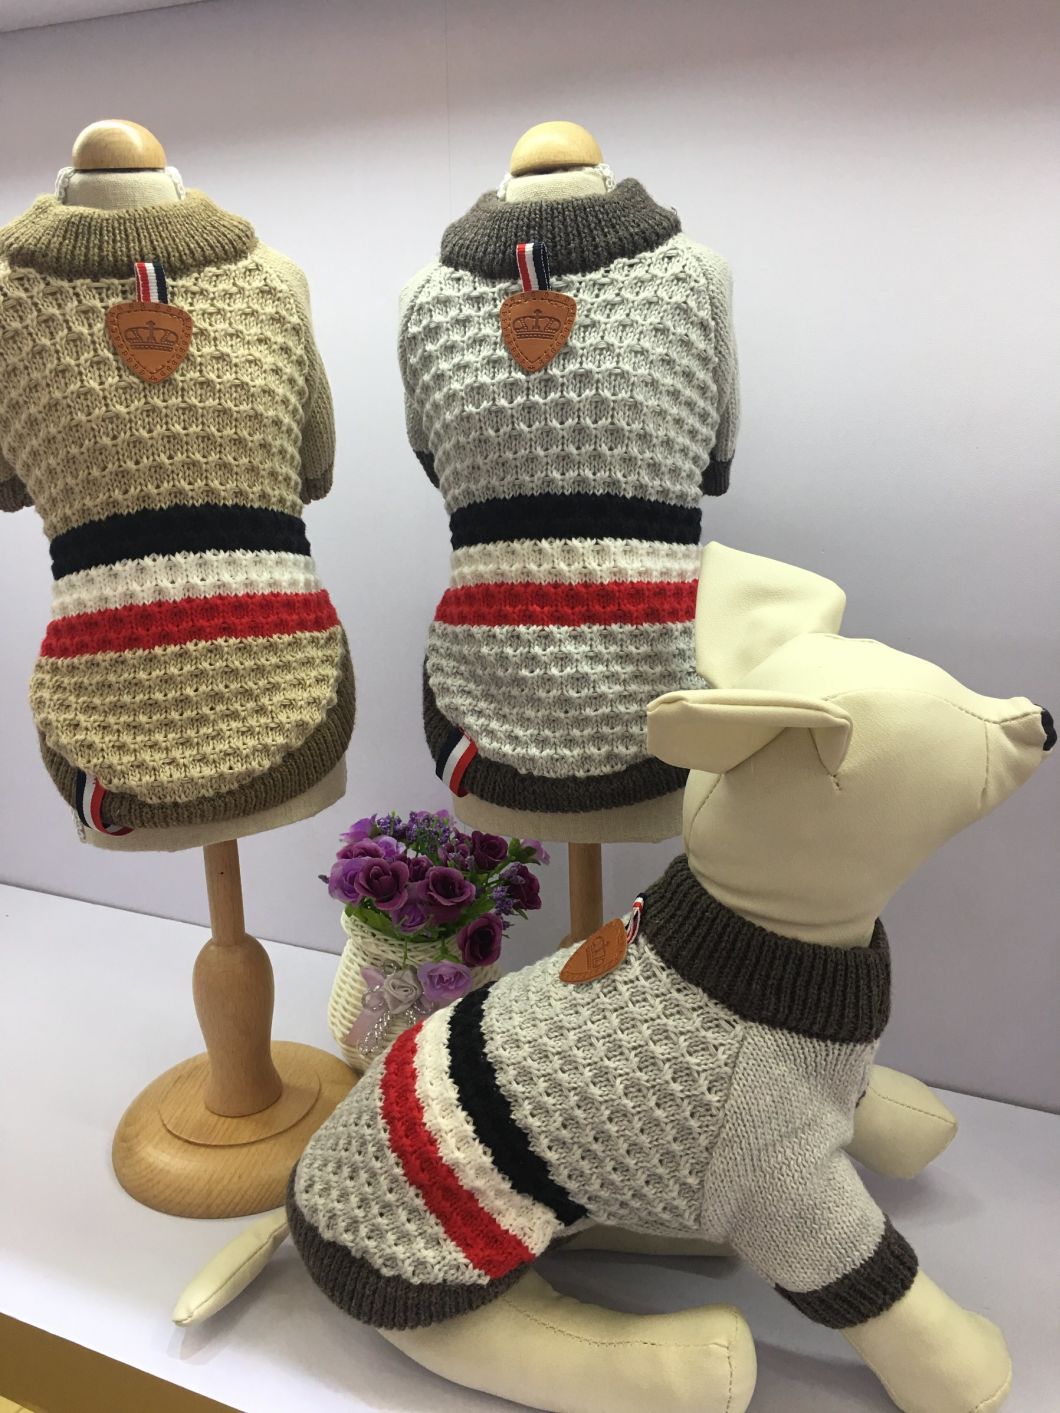 Design Cute Knitting Holiday Pet Clothing Christmas Dog Sweaters